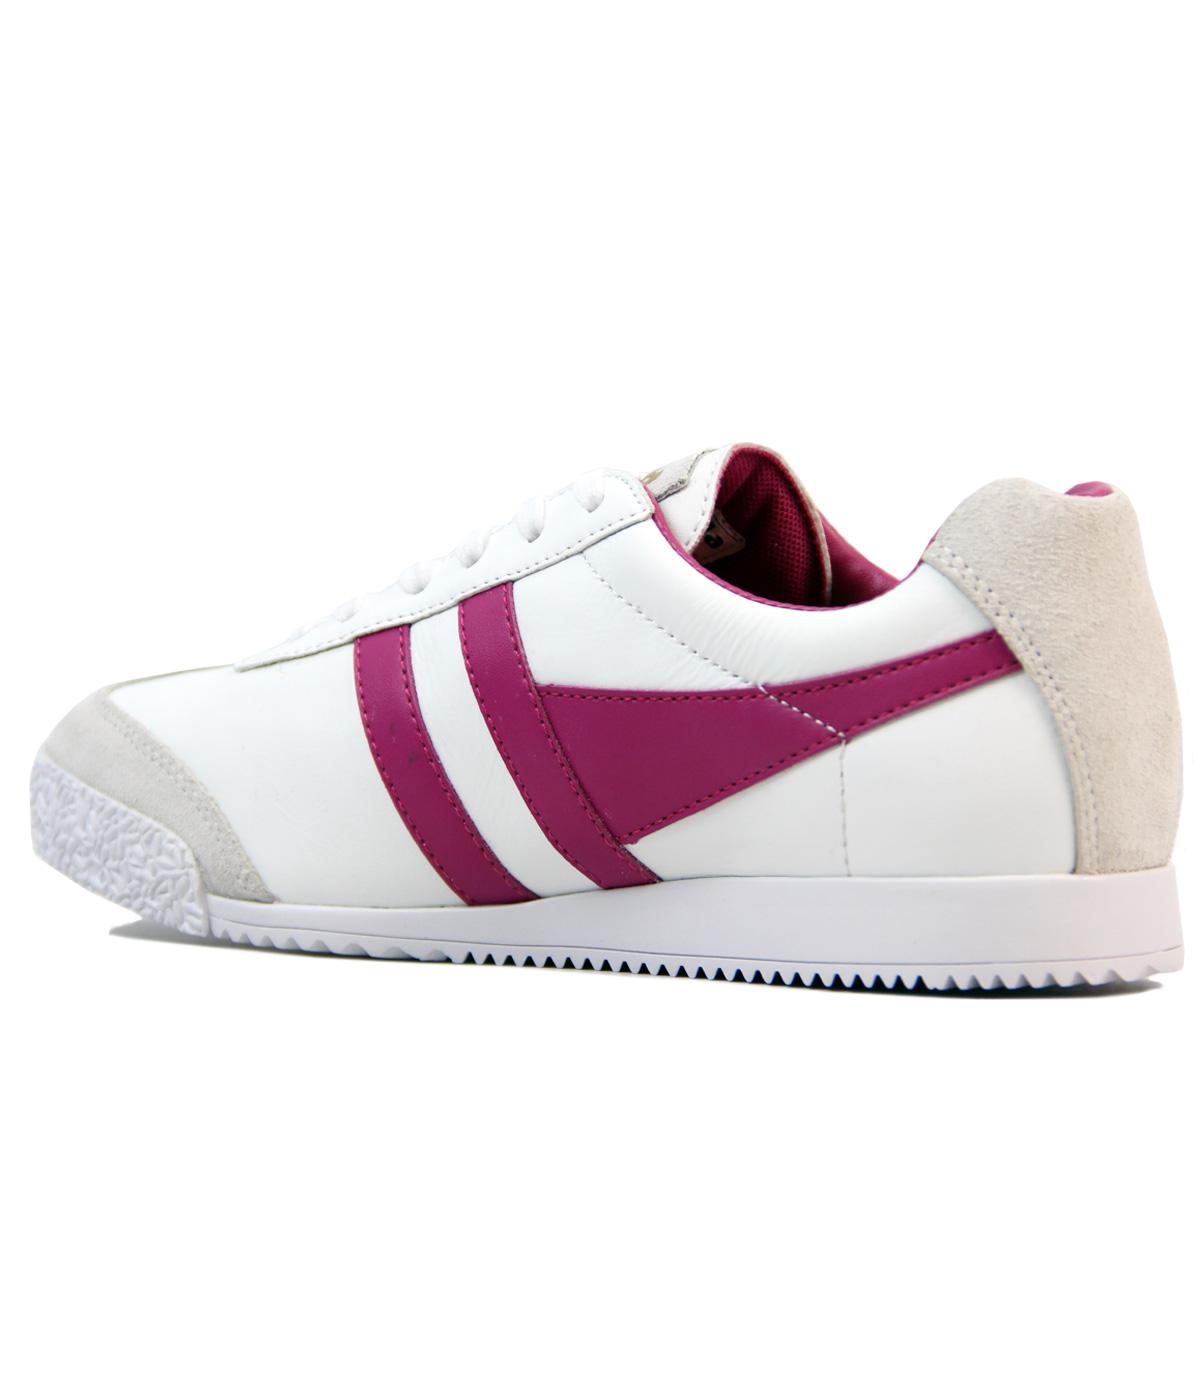 GOLA Harrier Womens Retro 70s Indie Leather Trainers White/Pink